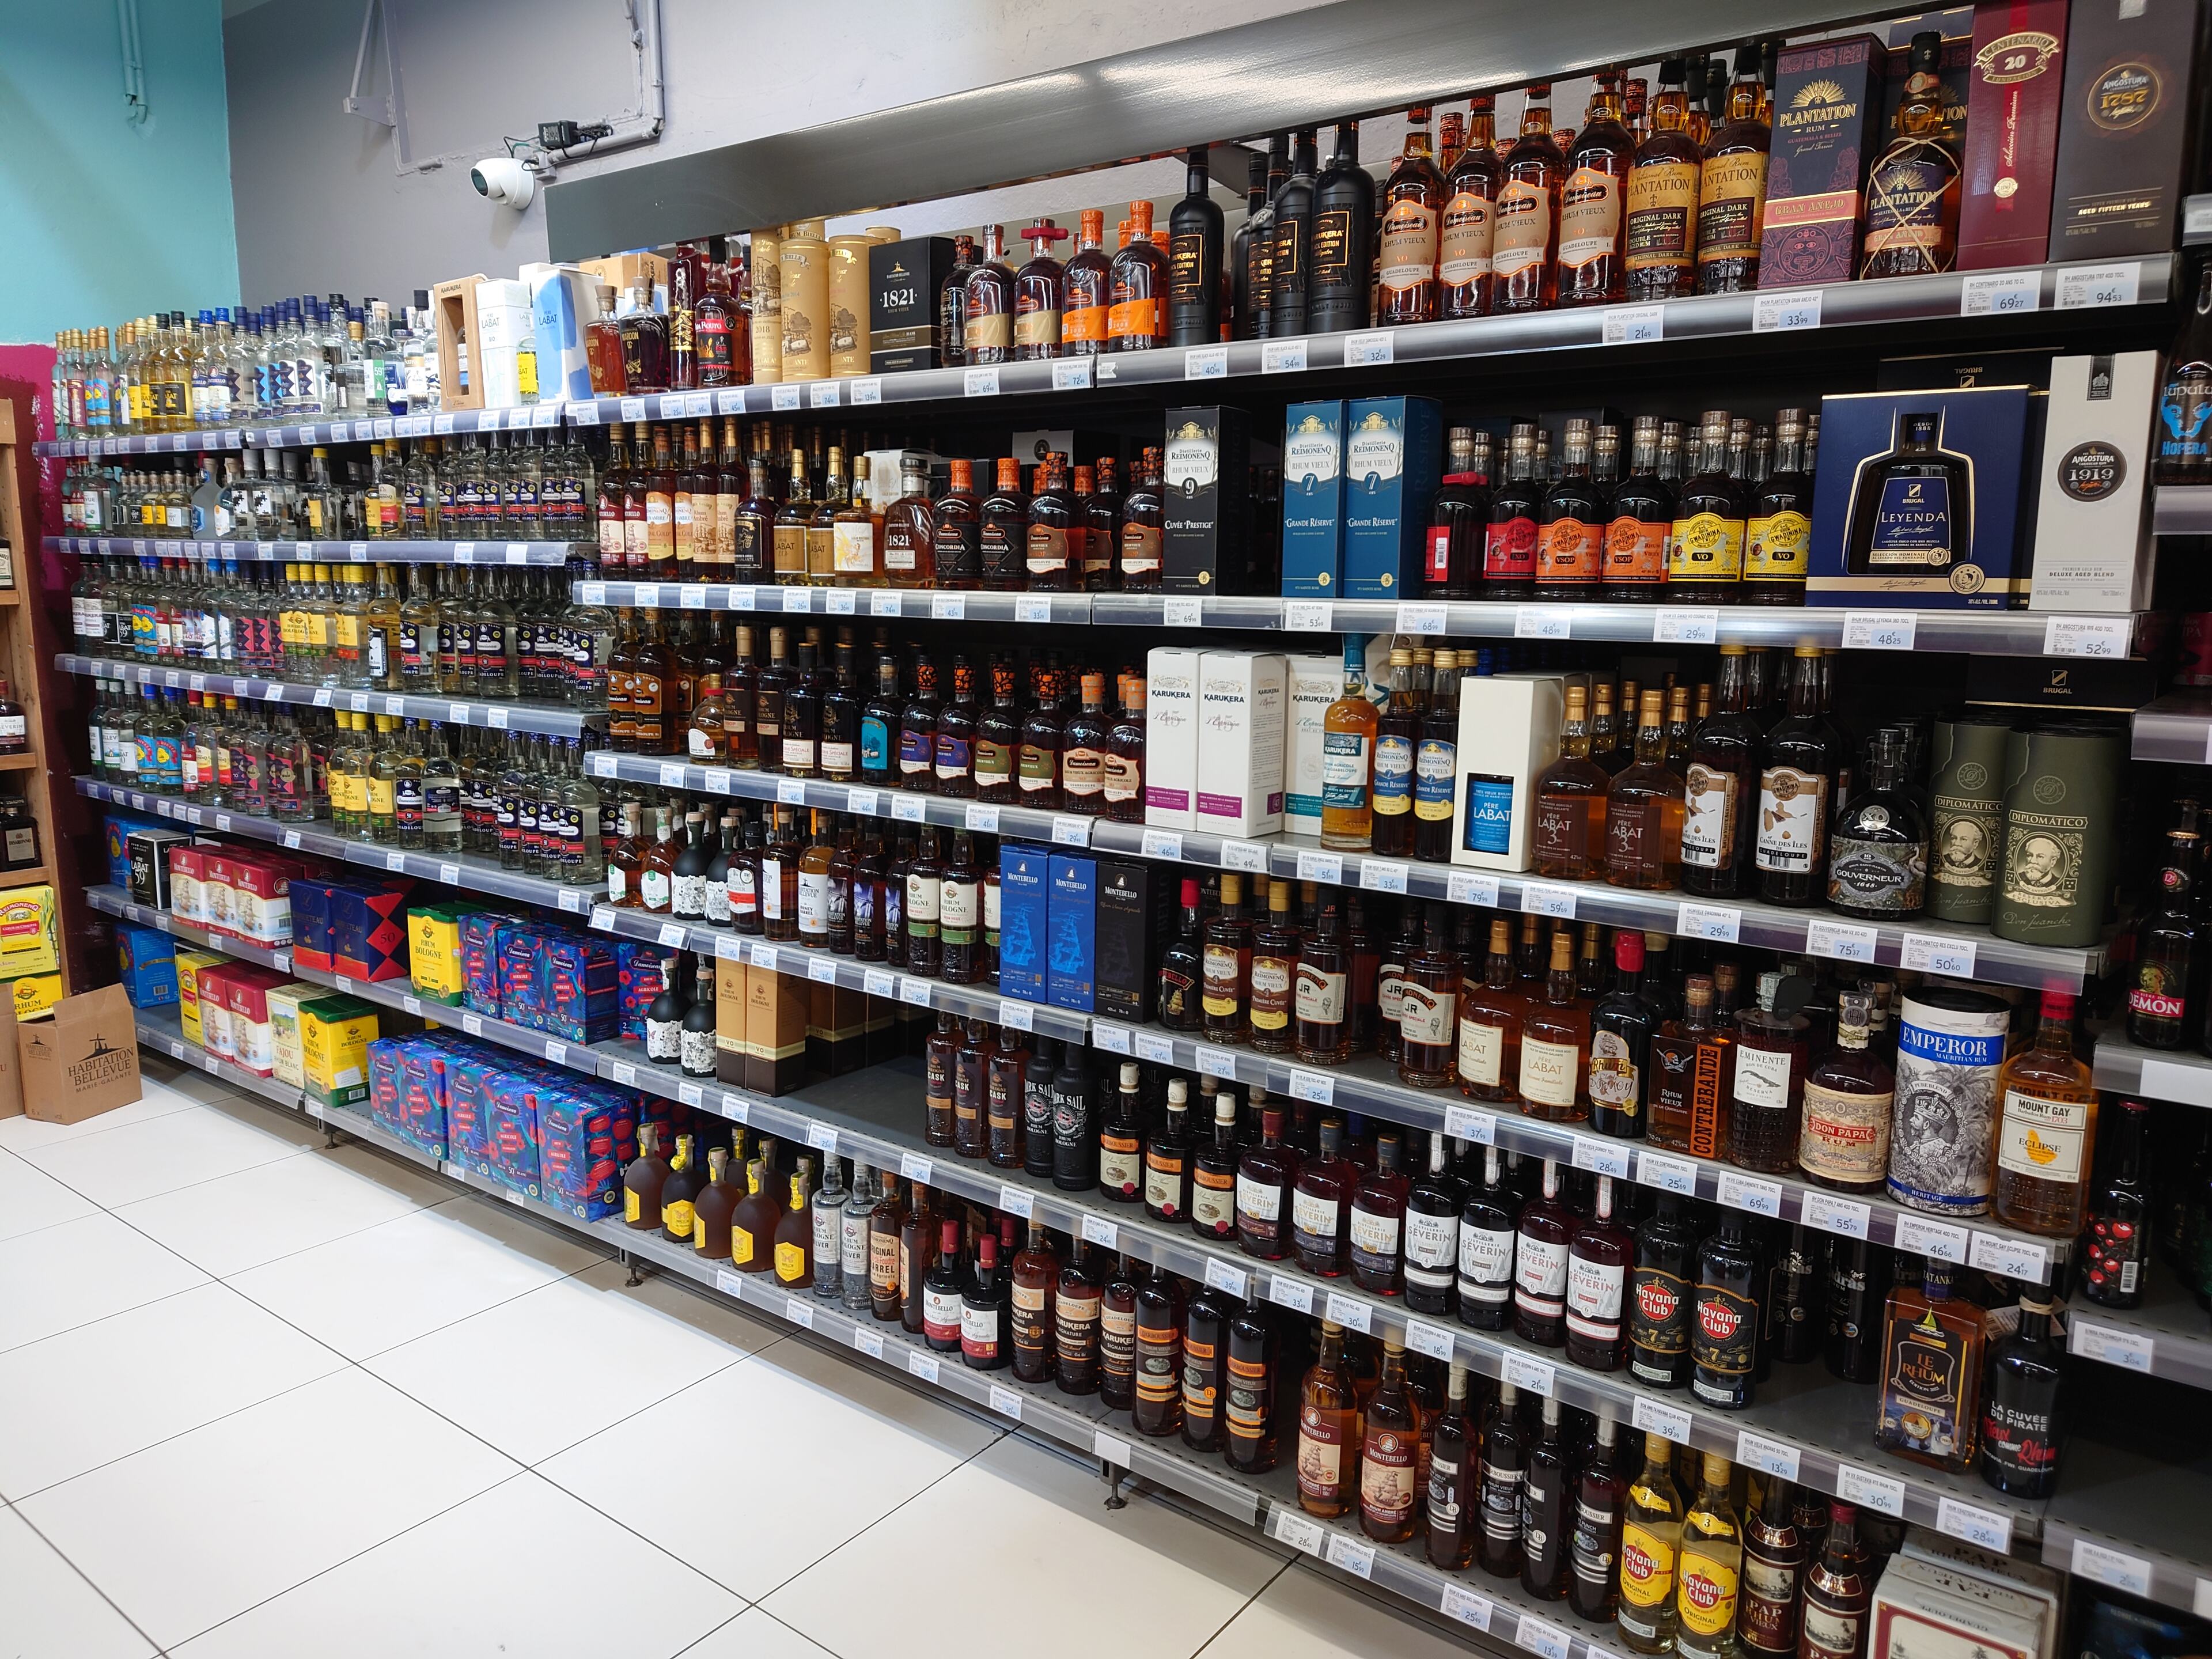 Pistonheads - The image shows a well-stocked liquor store with an array of bottles. The store is filled to the brim with various types of alcohol, including whiskey, rum, gin, and vodka. There are also several cases of beer on the shelves. The bottles are neatly arranged on multiple shelves, showcasing a diverse selection of drinks. In the background, there's a sign that reads "Sales," indicating that this is indeed a retail store for alcoholic beverages. The atmosphere appears inviting and well-organized, ready for customers to browse and make their selections.